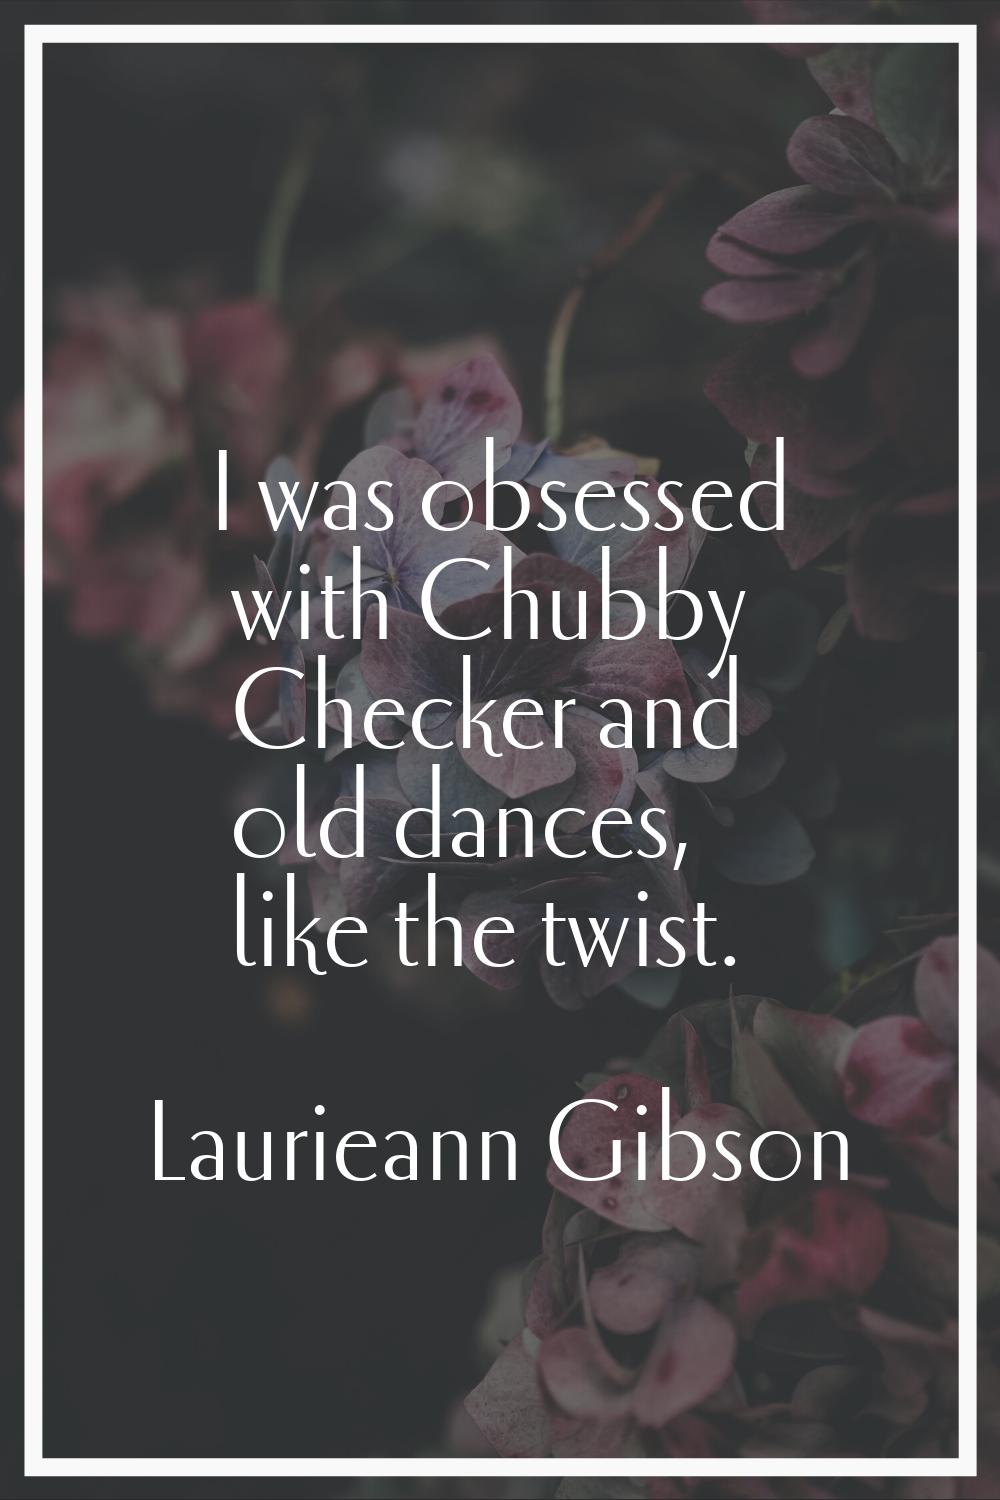 I was obsessed with Chubby Checker and old dances, like the twist.